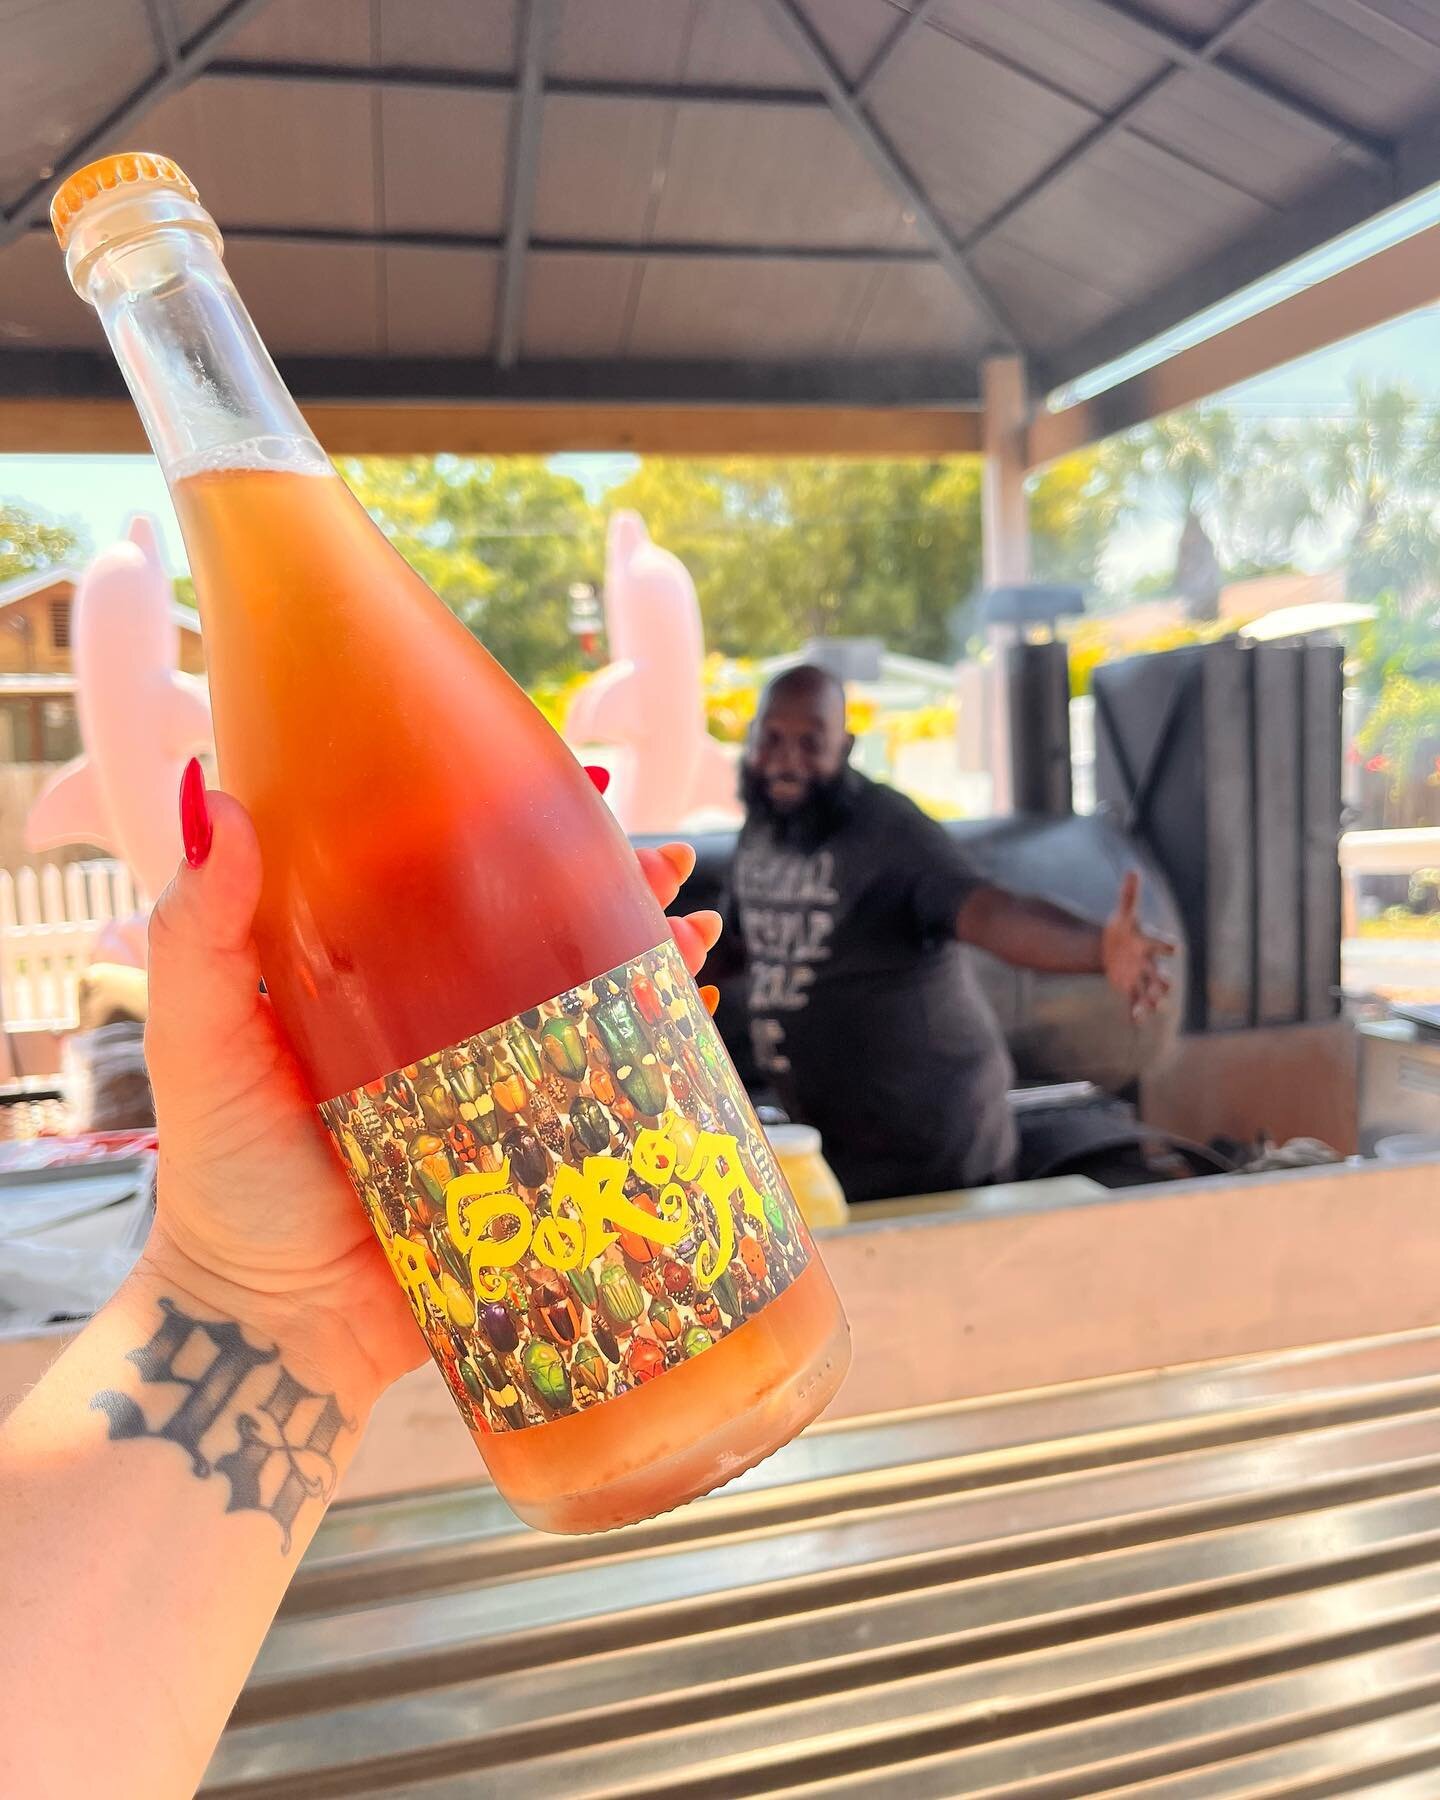 Let&rsquo;s get this wine and BBQ party started 🍷 🍗 

This La Sorga from Goatbou Selections is a Grenache Blanc pet nat ros&eacute; with hints of citrus, peach, grapefruit and wild strawberry. Excellent body, great acidity and smooth finish.

#gulf